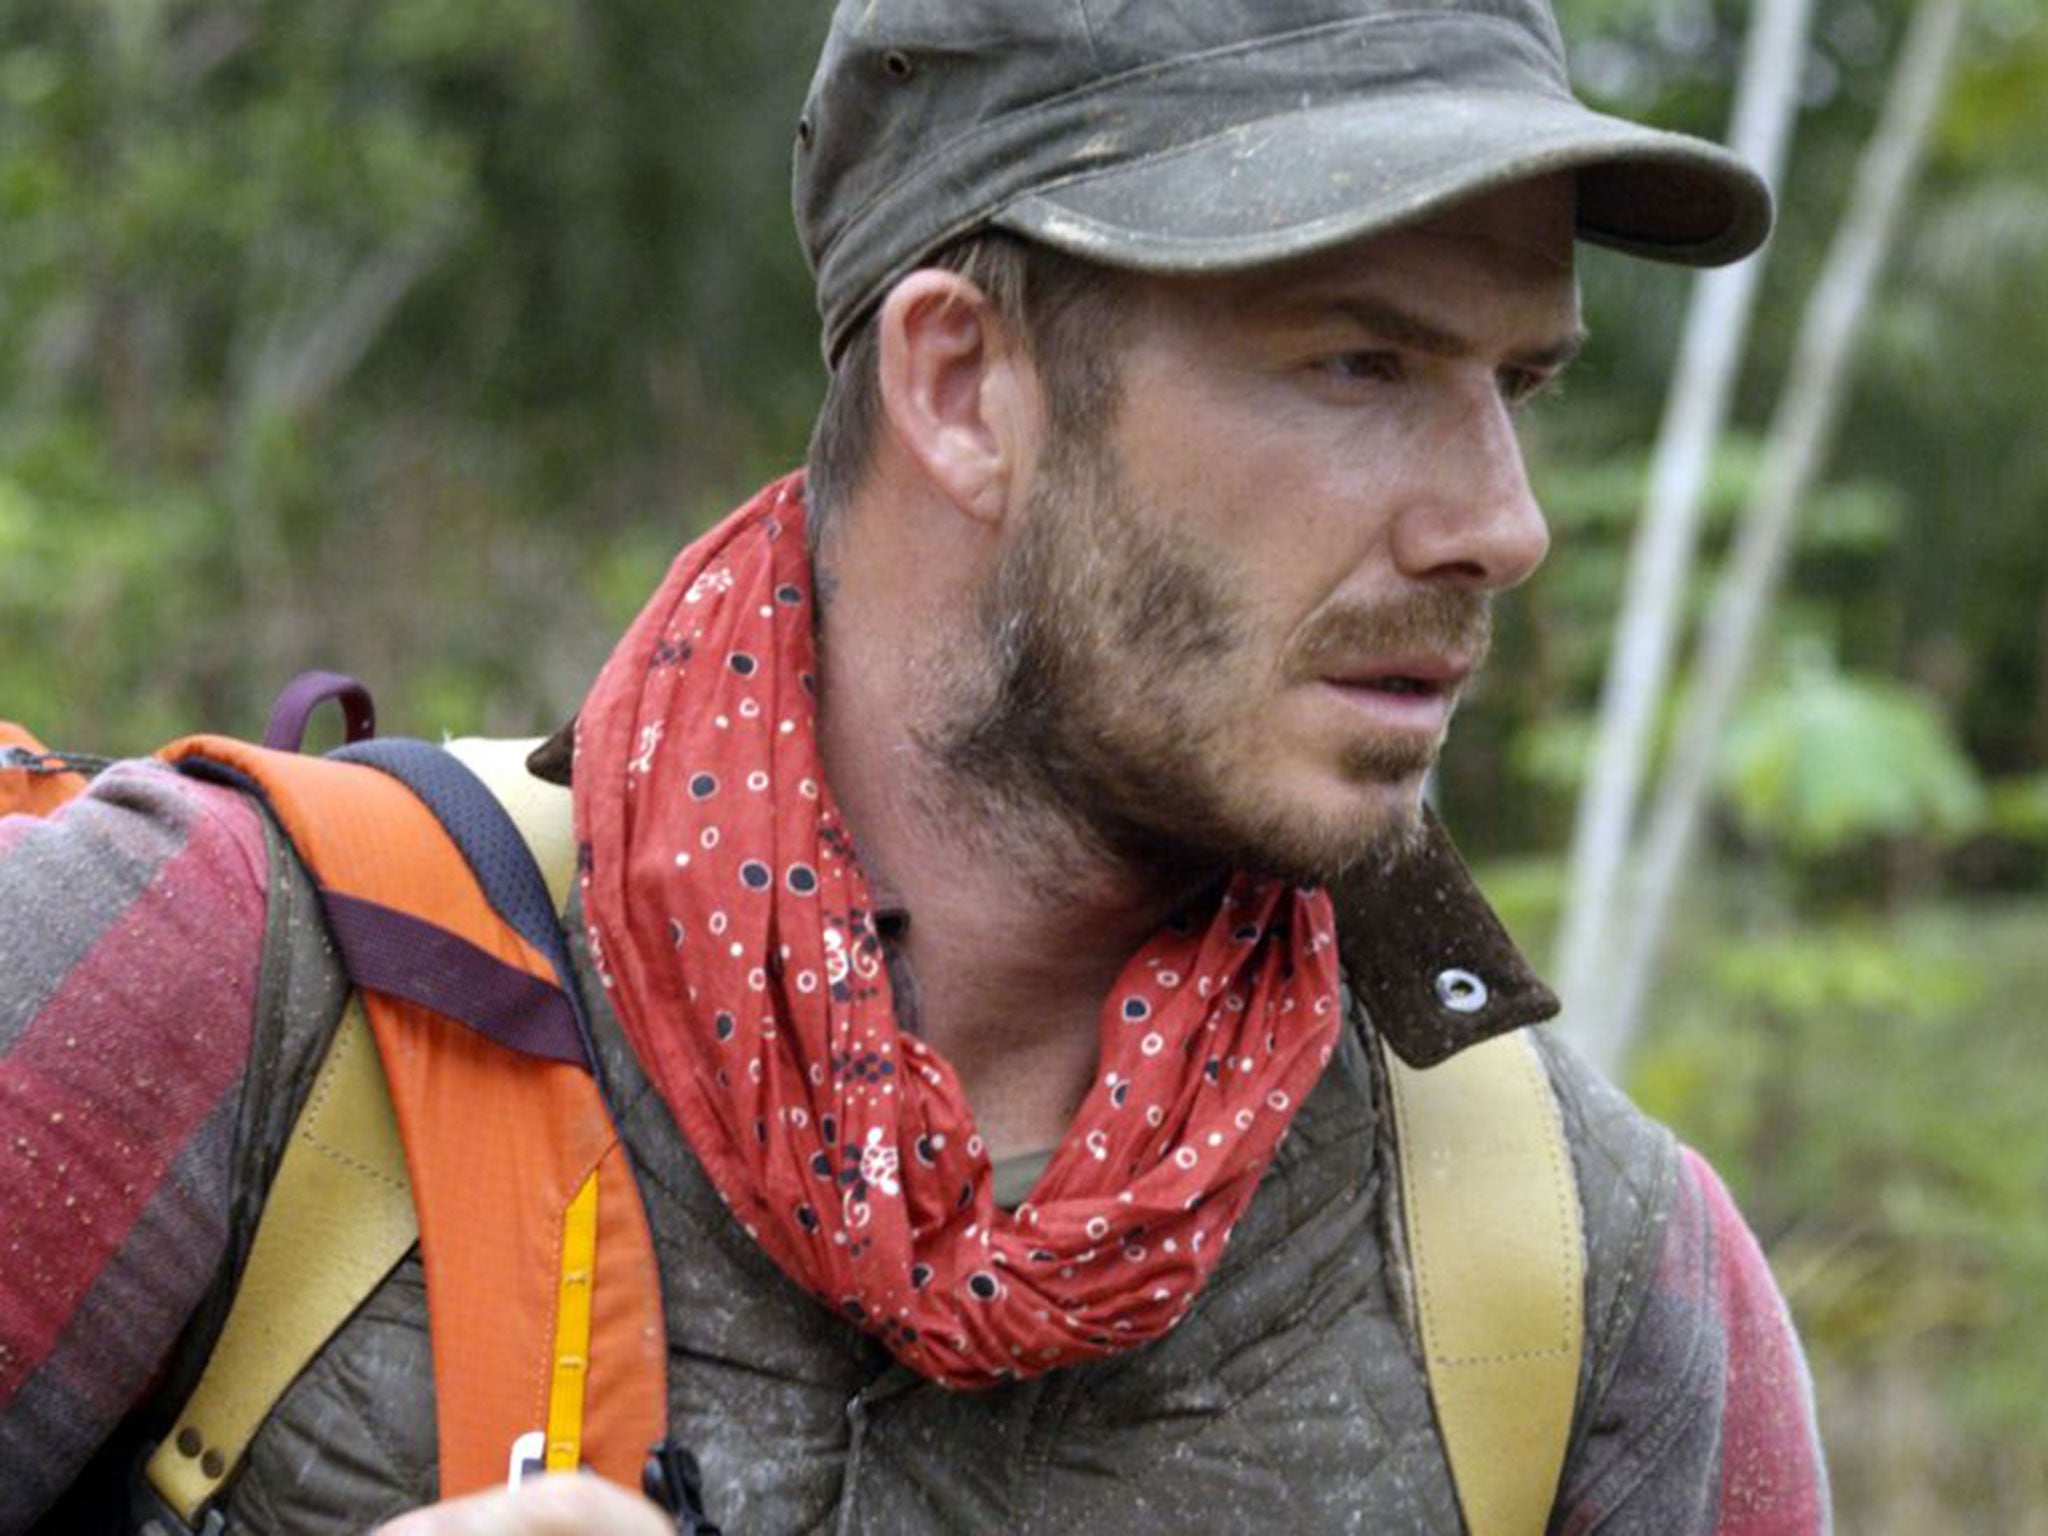 The former England footballer ventured into the Amazon jungle for his programme, 'David Beckham into the Unknown'